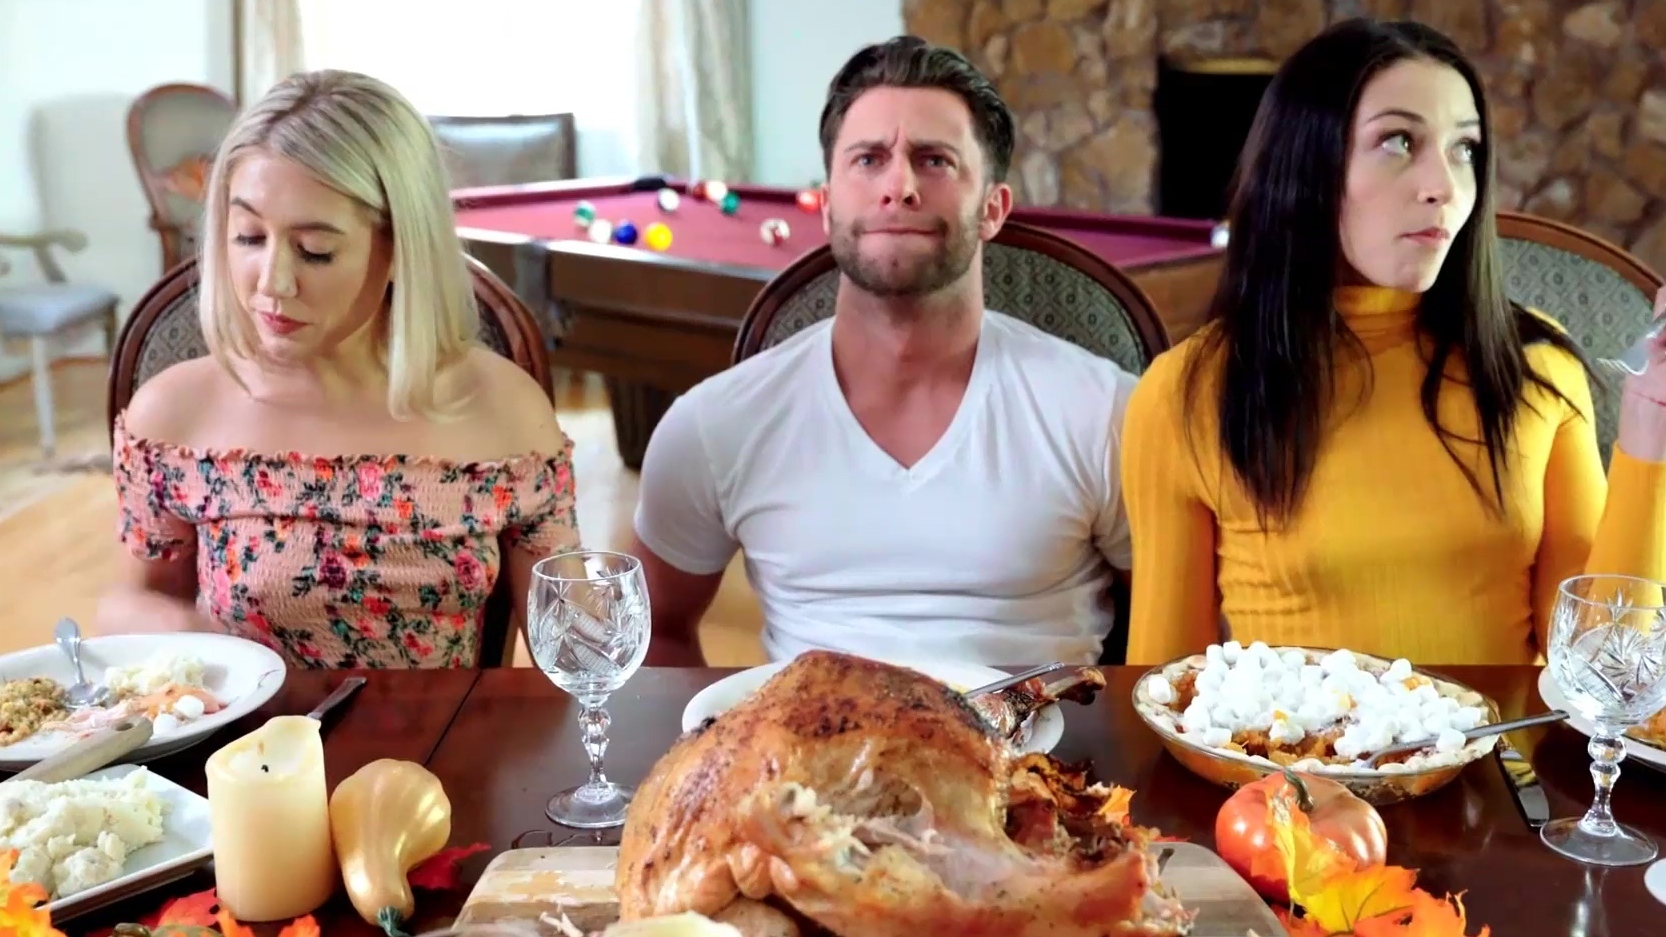 1666px x 937px - Wild handjob from brunette and blonde stepsisters during Thanksgiving dinner